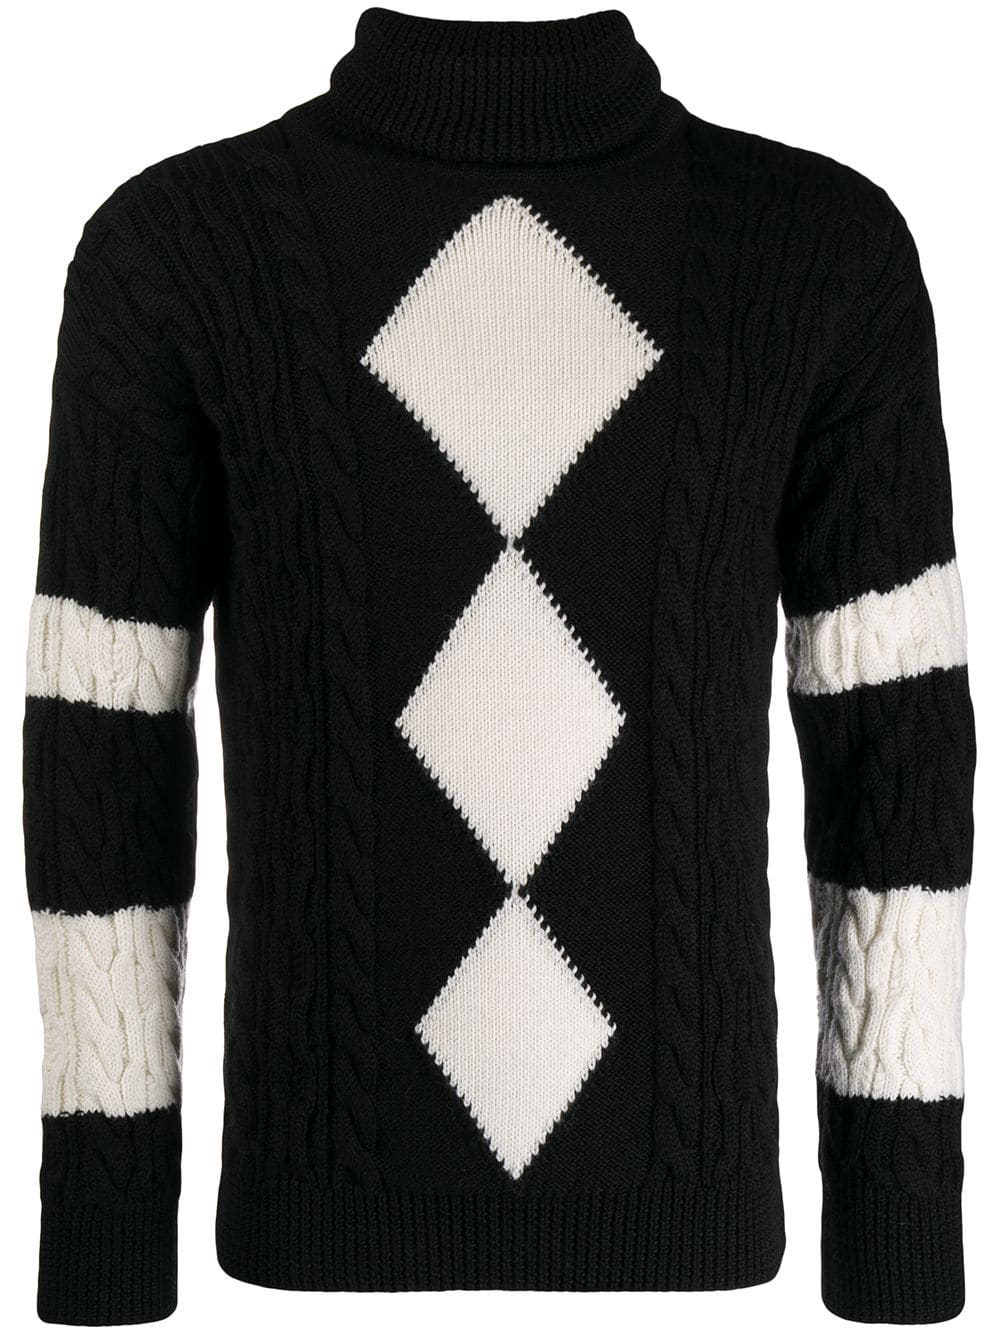 Ski Into Style…Stylish Looks for Winter Vacation Destinations, apres ski men's outfit, Saint Laurent turtle neck argyle sweater black and white